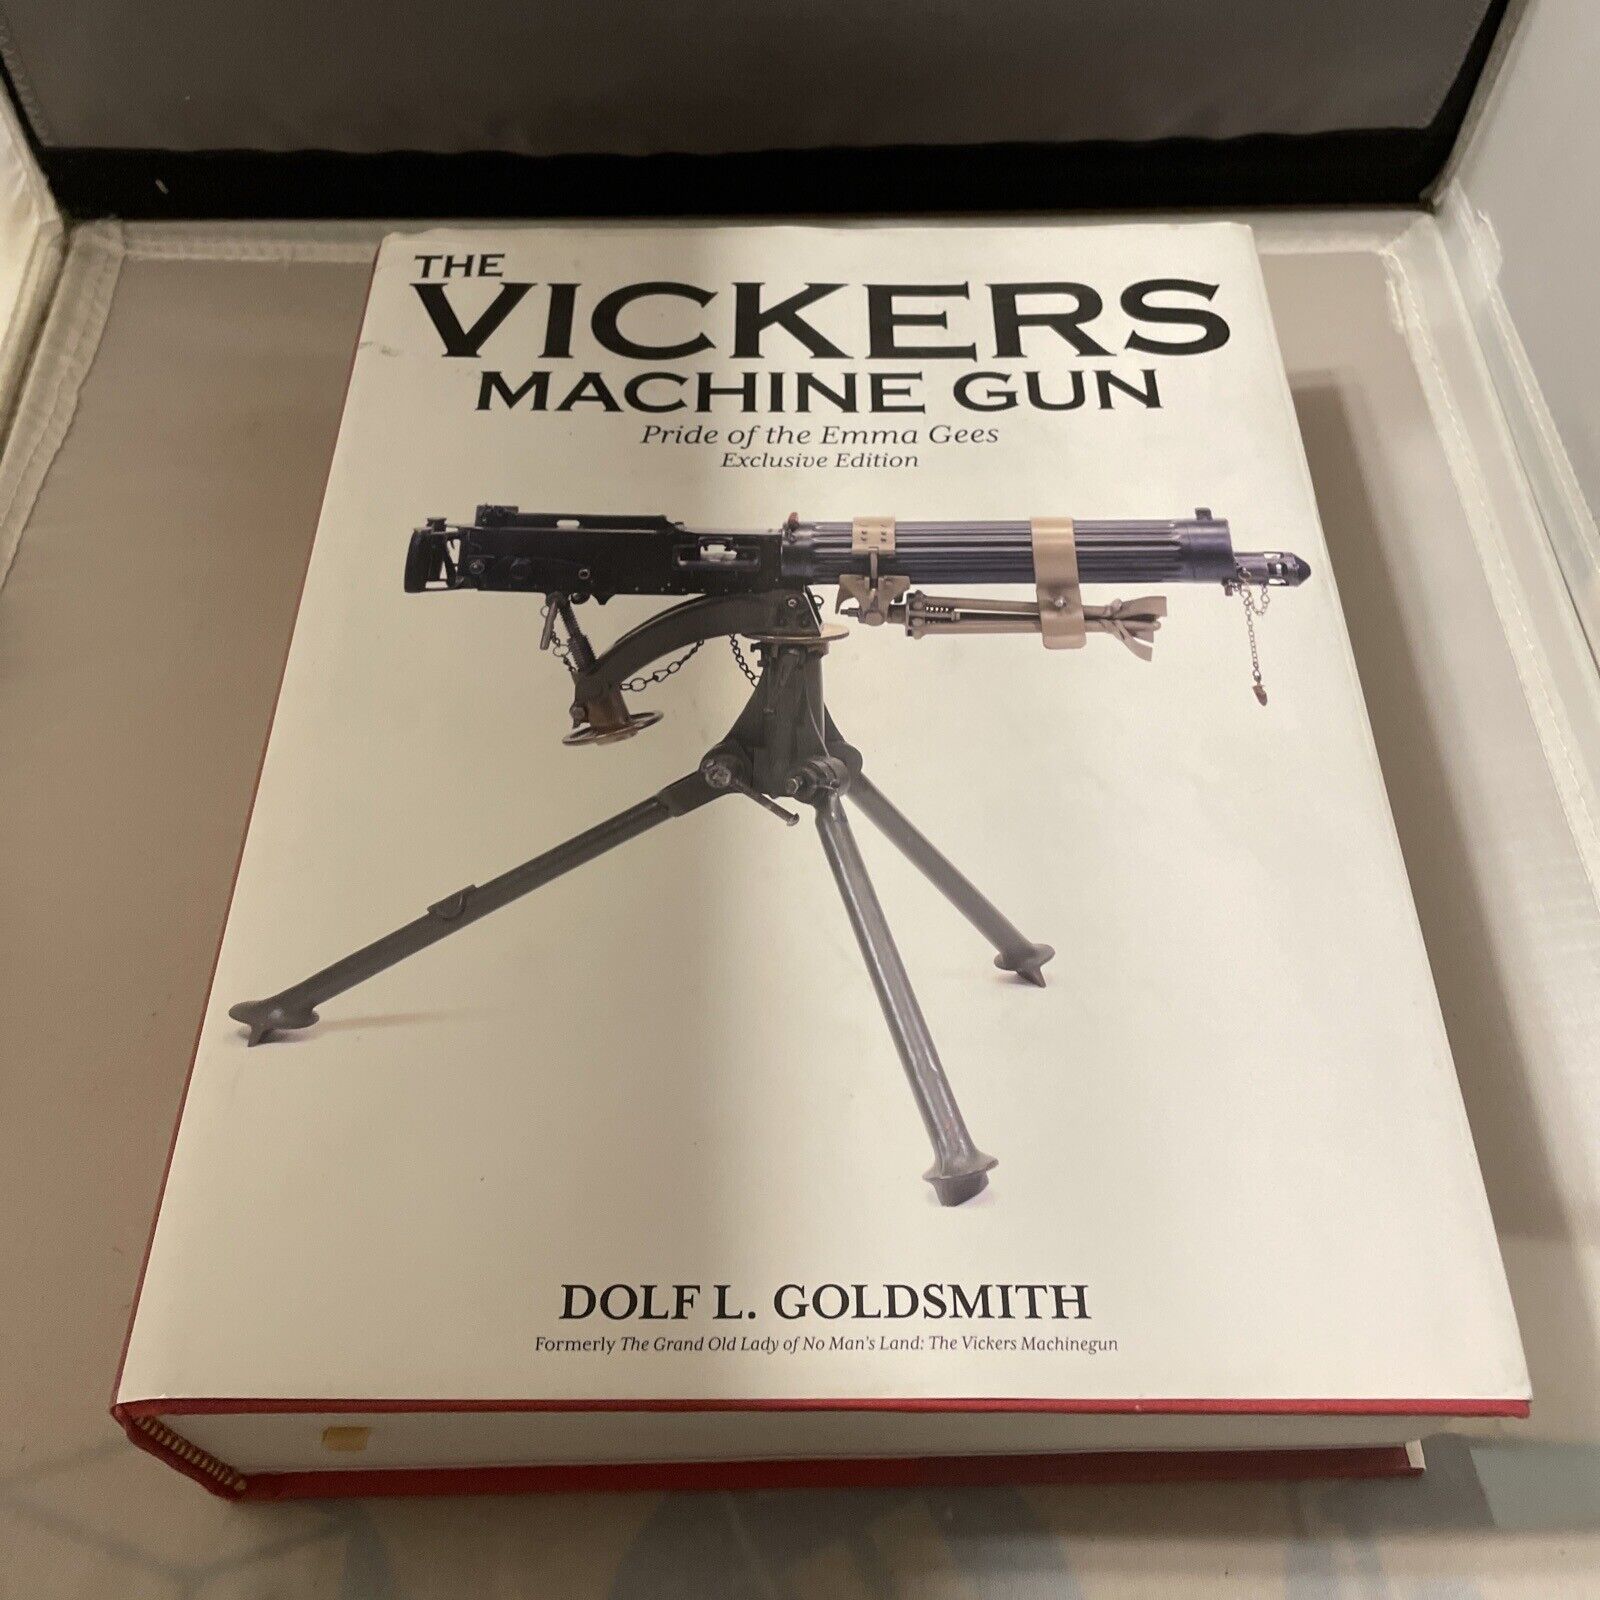 The Vickers Machine Gun Pride of the Emma Gees EXCLUSIVE EDITION Dolf L Goldsmit